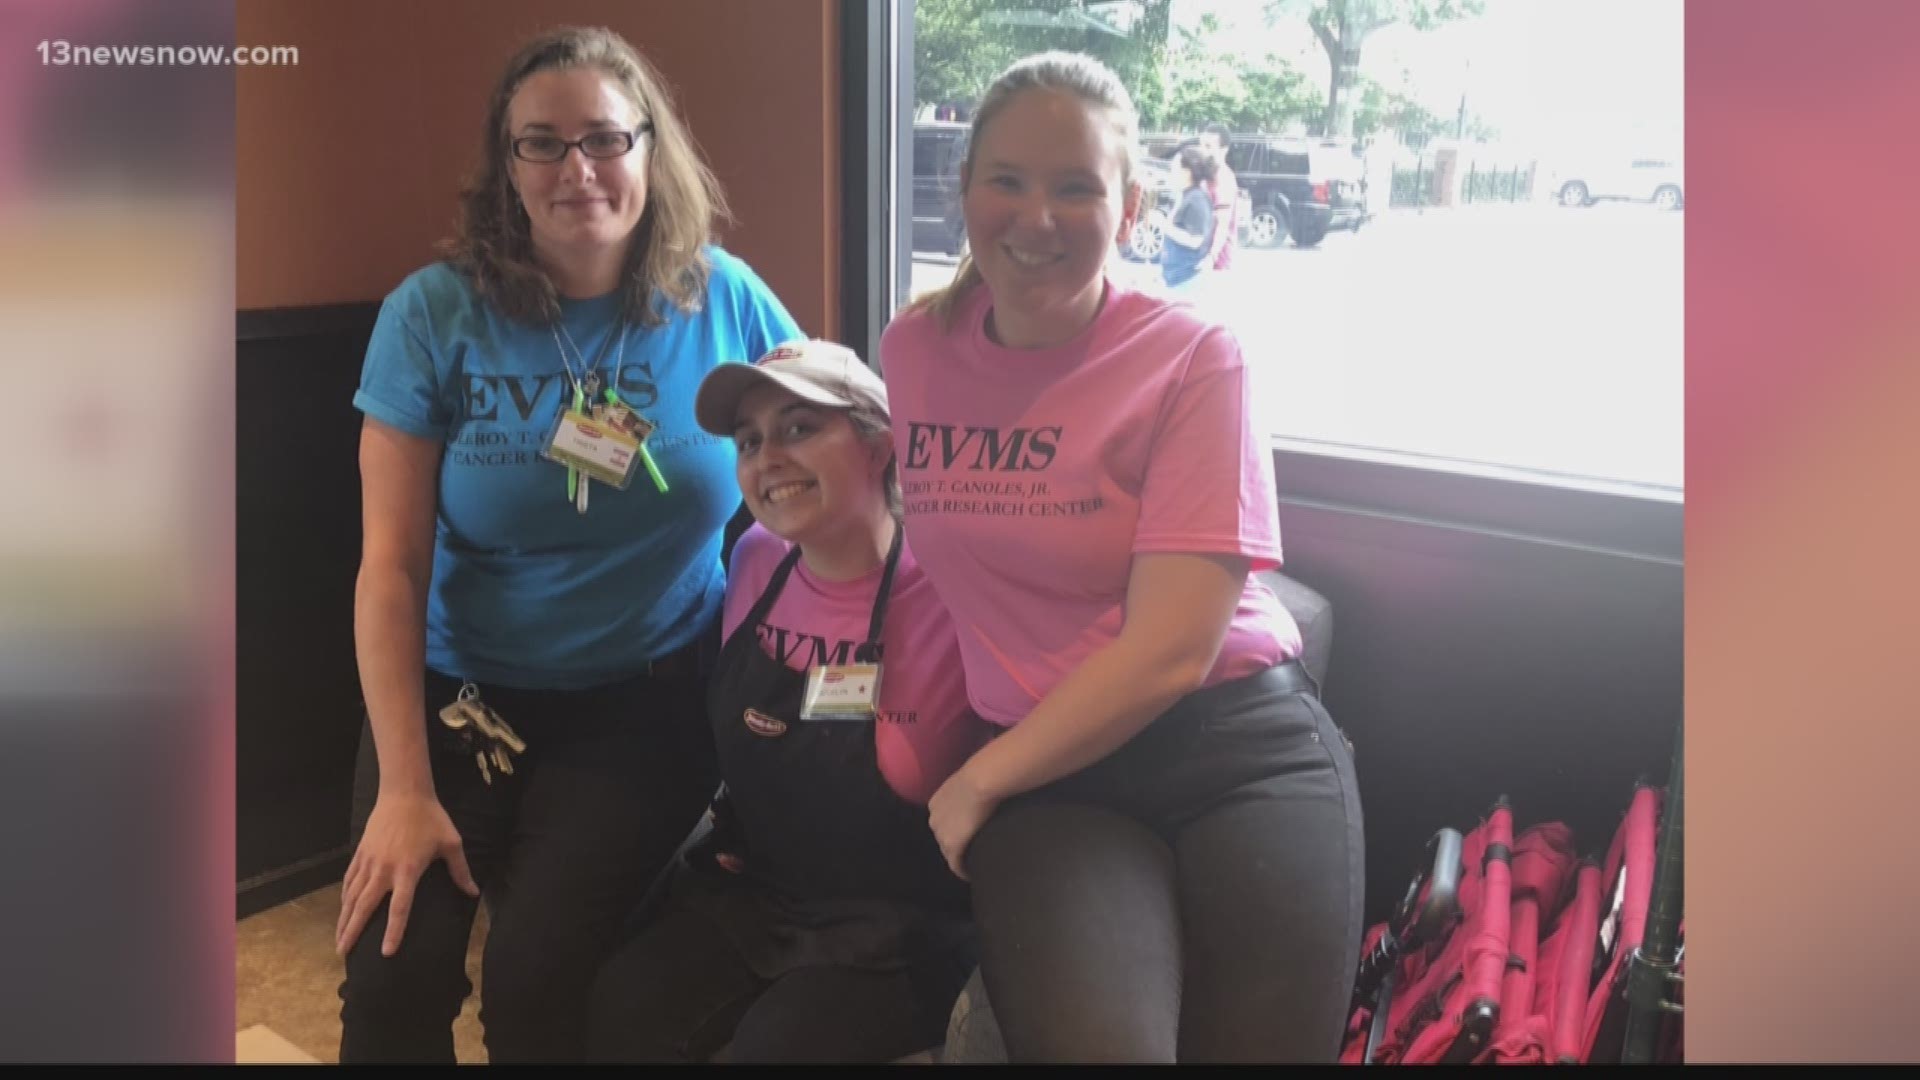 During the month of June, Jason's Deli customers will have an opportunity to round up their purchase to support cancer research at EVMS.